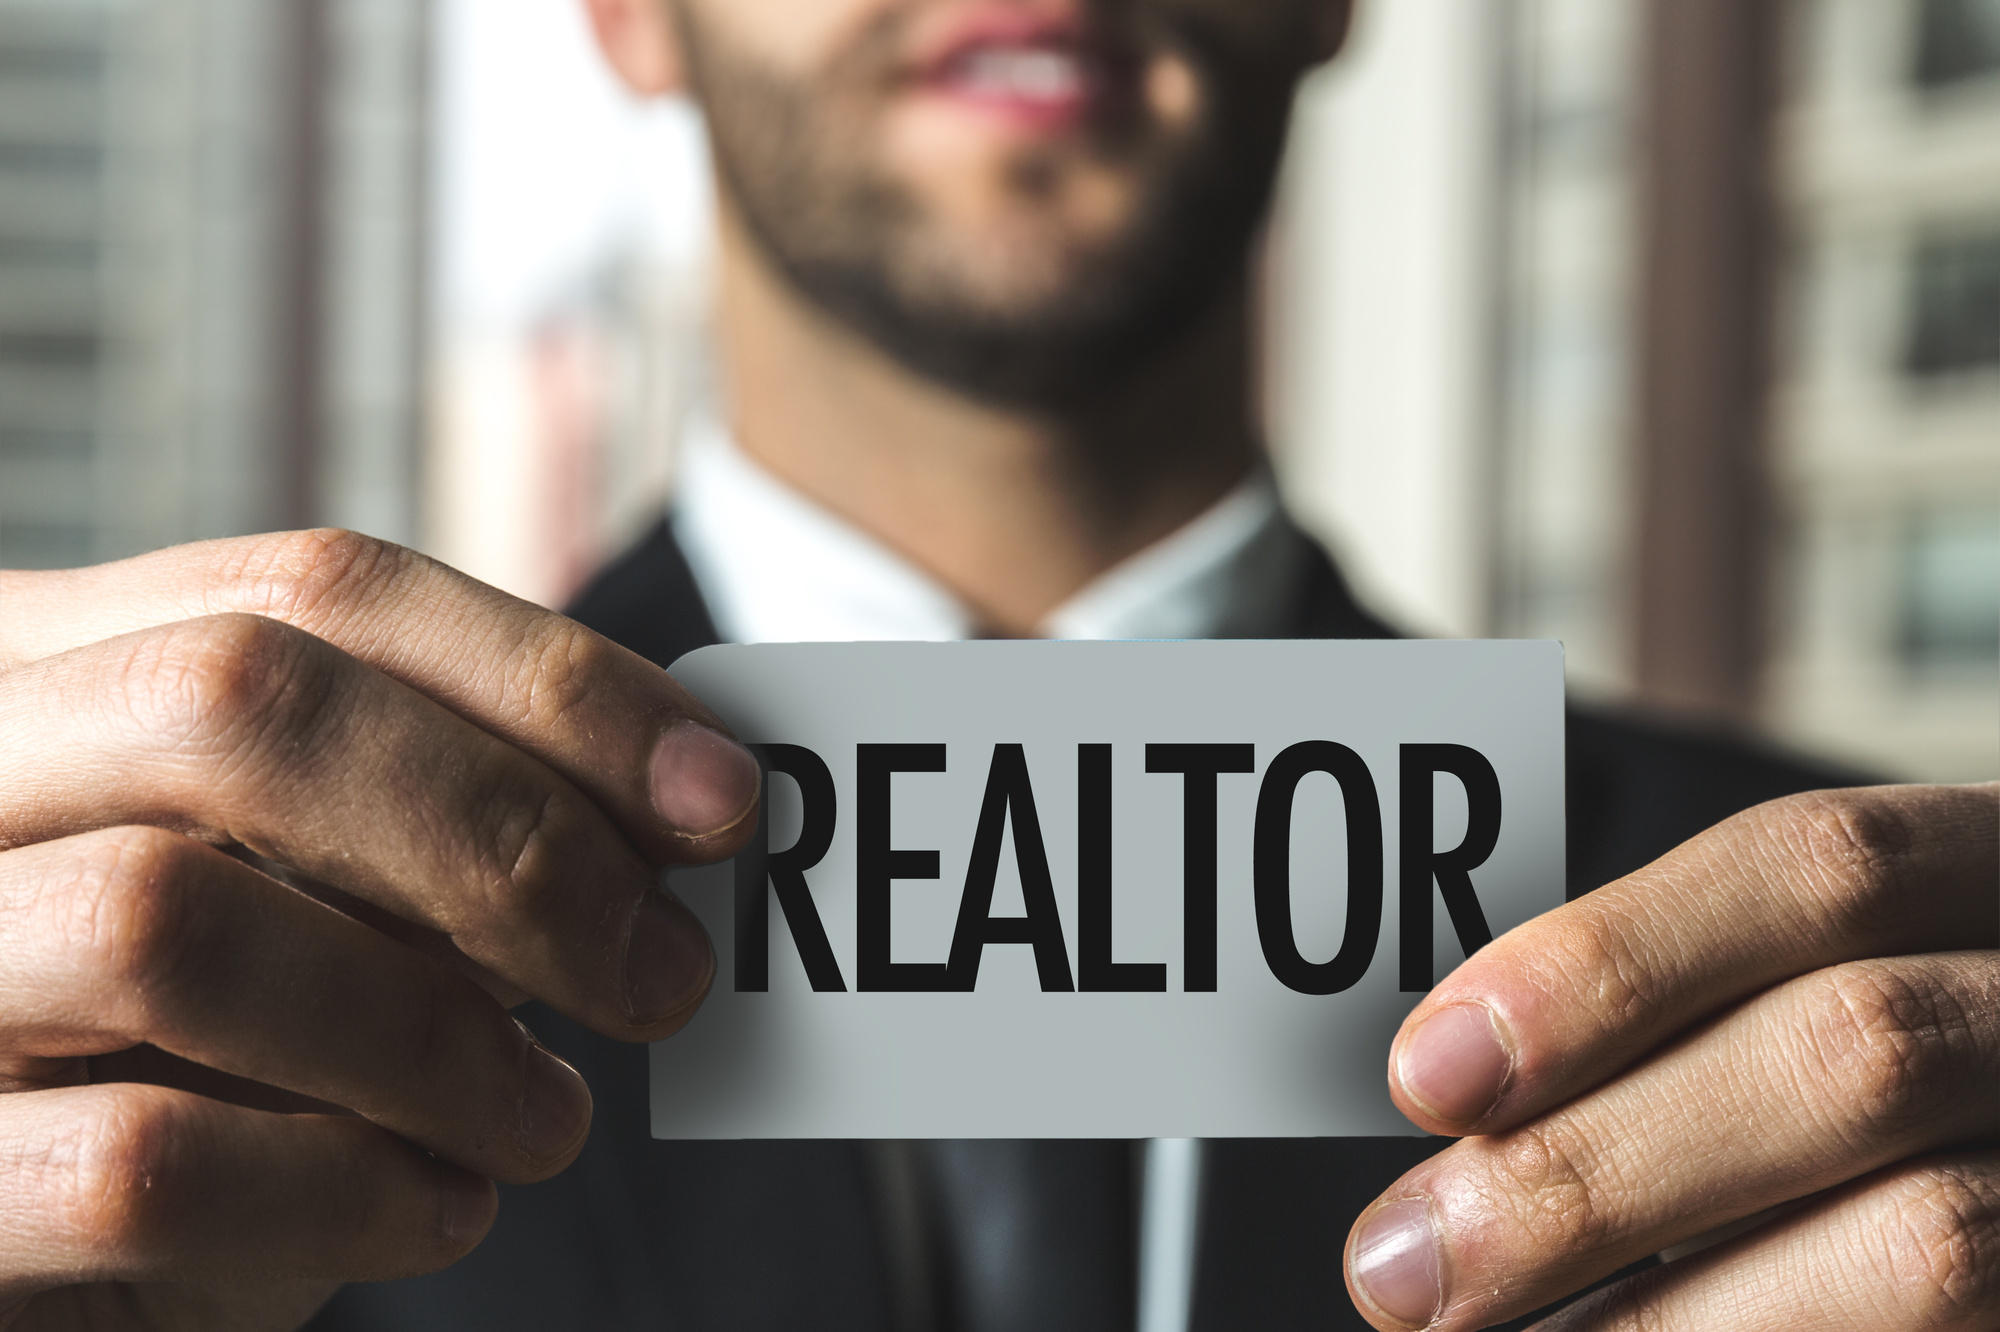 7 Questions to Ask Before Hiring a Real Estate Agent